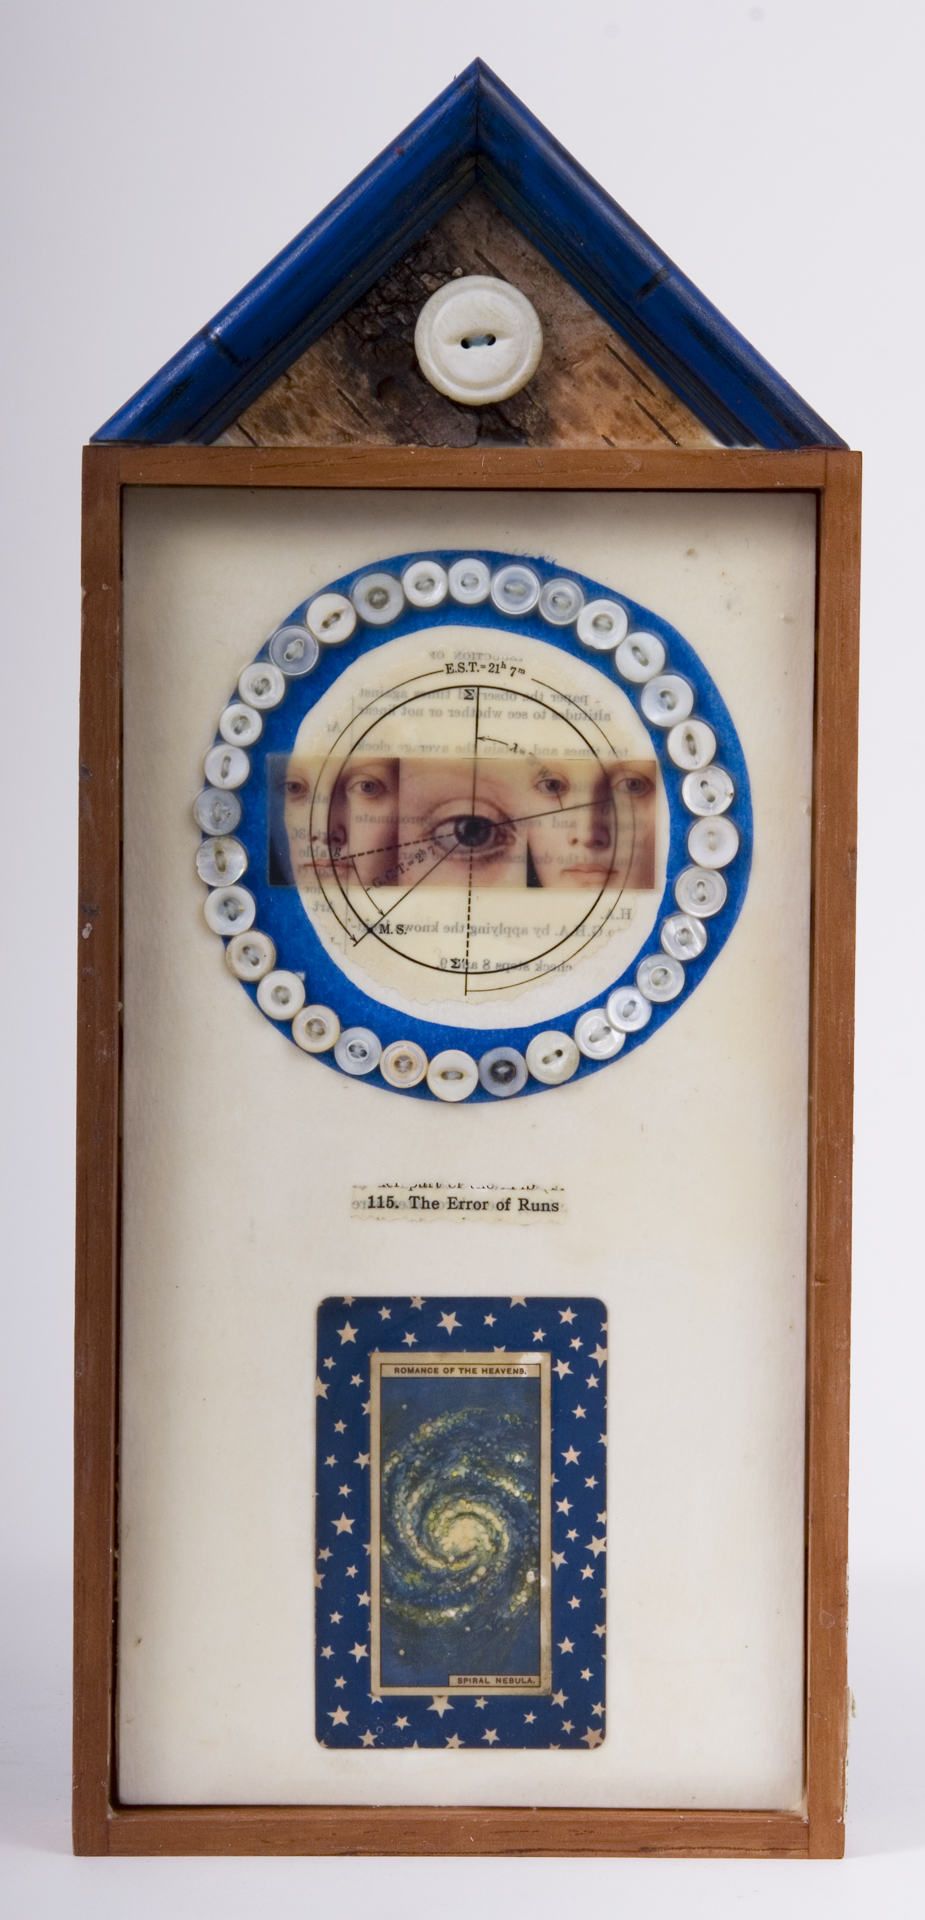     \"115. The Error of Runs\"
    mixed-media assemblage
    13.75 x 6 x 1.25
    2009
    SOLD
    Cigar box, frame sample, birch bark, mother of pearl buttons, fortune & tobac cards, transparency, ink, wax, astronomy text on watercolor paper